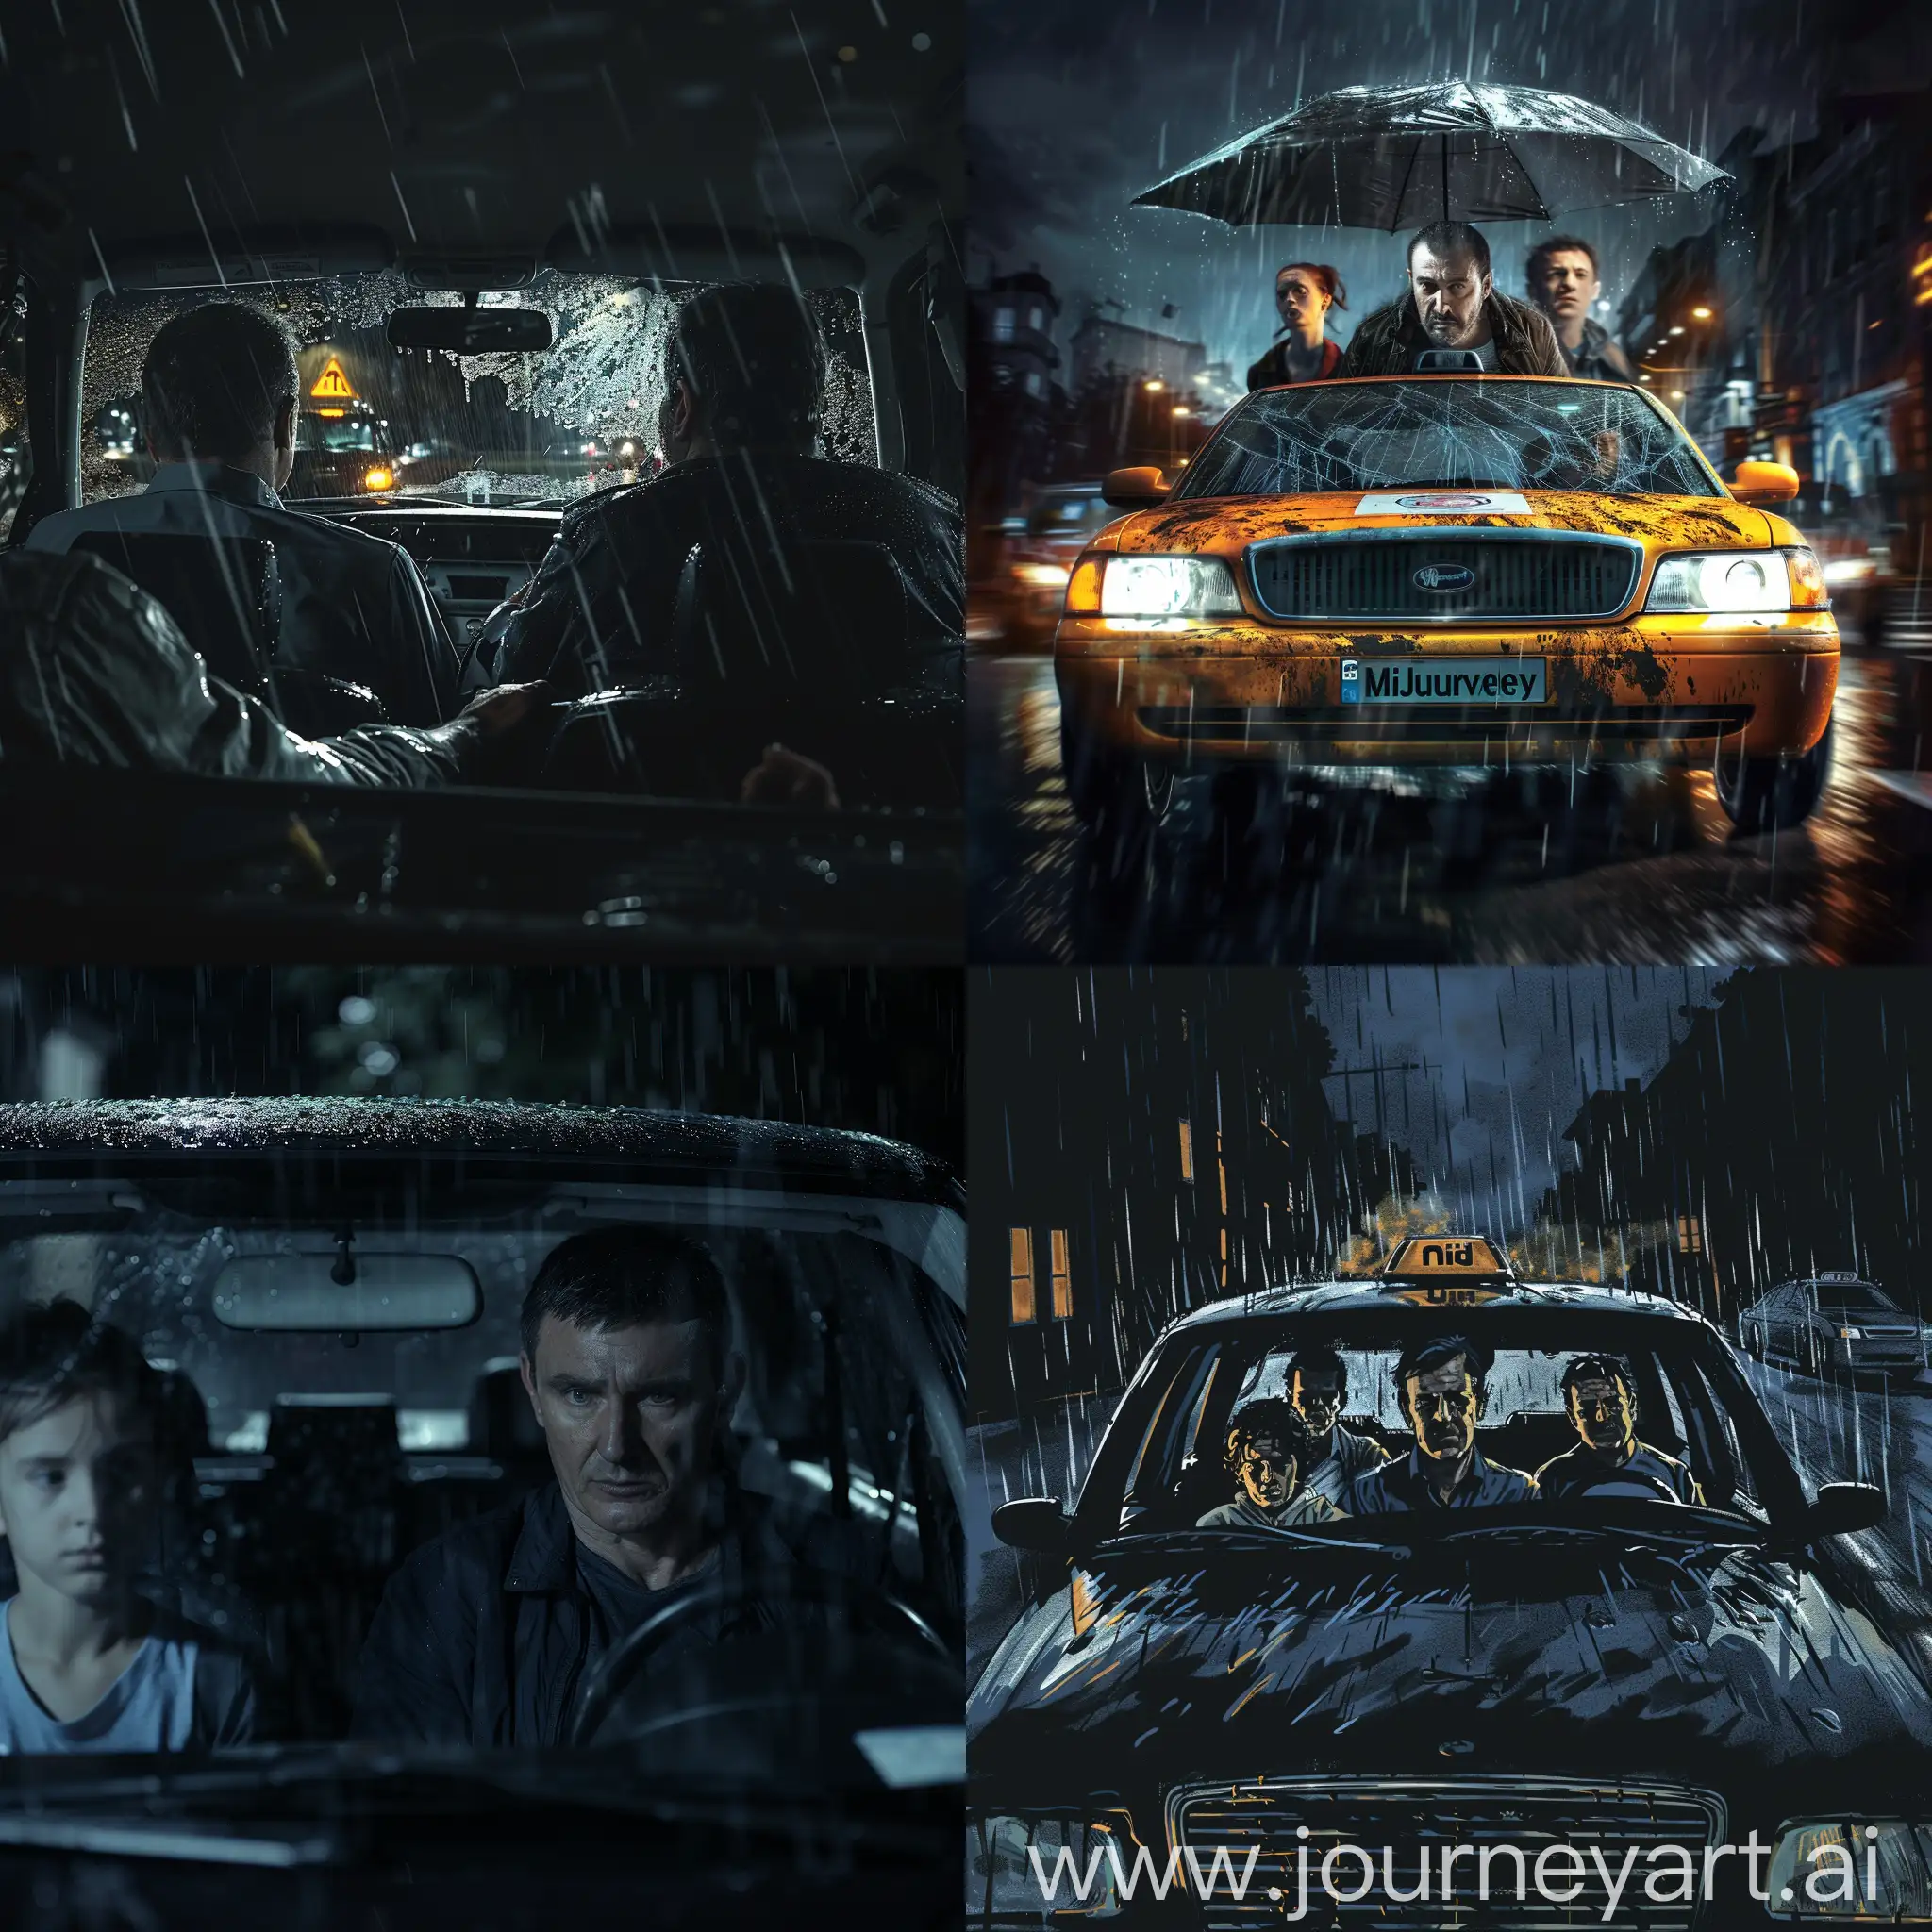 Mysterious-Taxi-Ride-Unraveling-Dark-Secrets-in-Rainy-Night